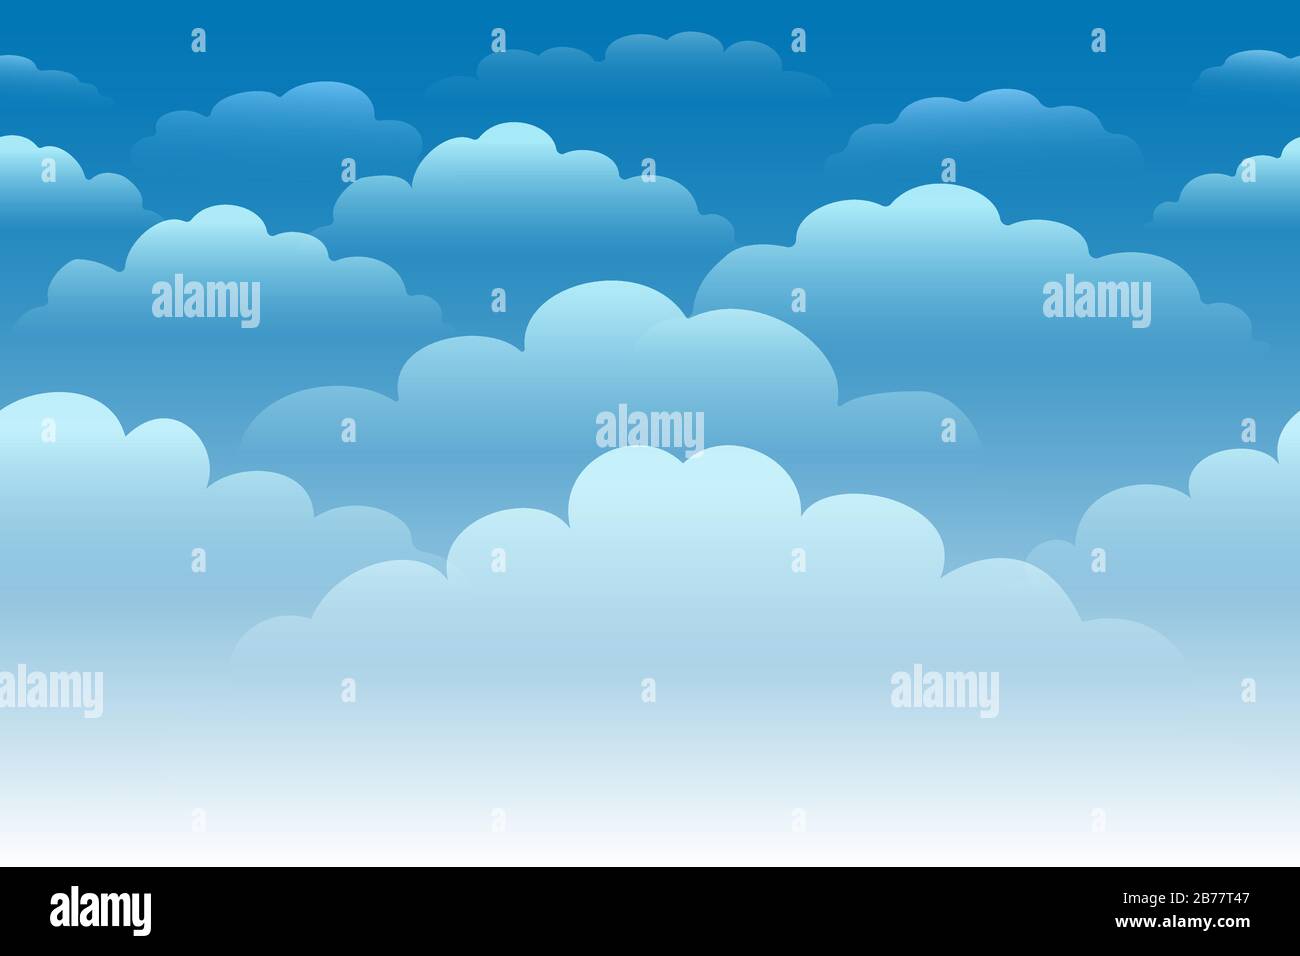 Cartoon blue cloudy sky. Horizontal seamless pattern with white fluffy clouds. Vector illustration. Stock Vector